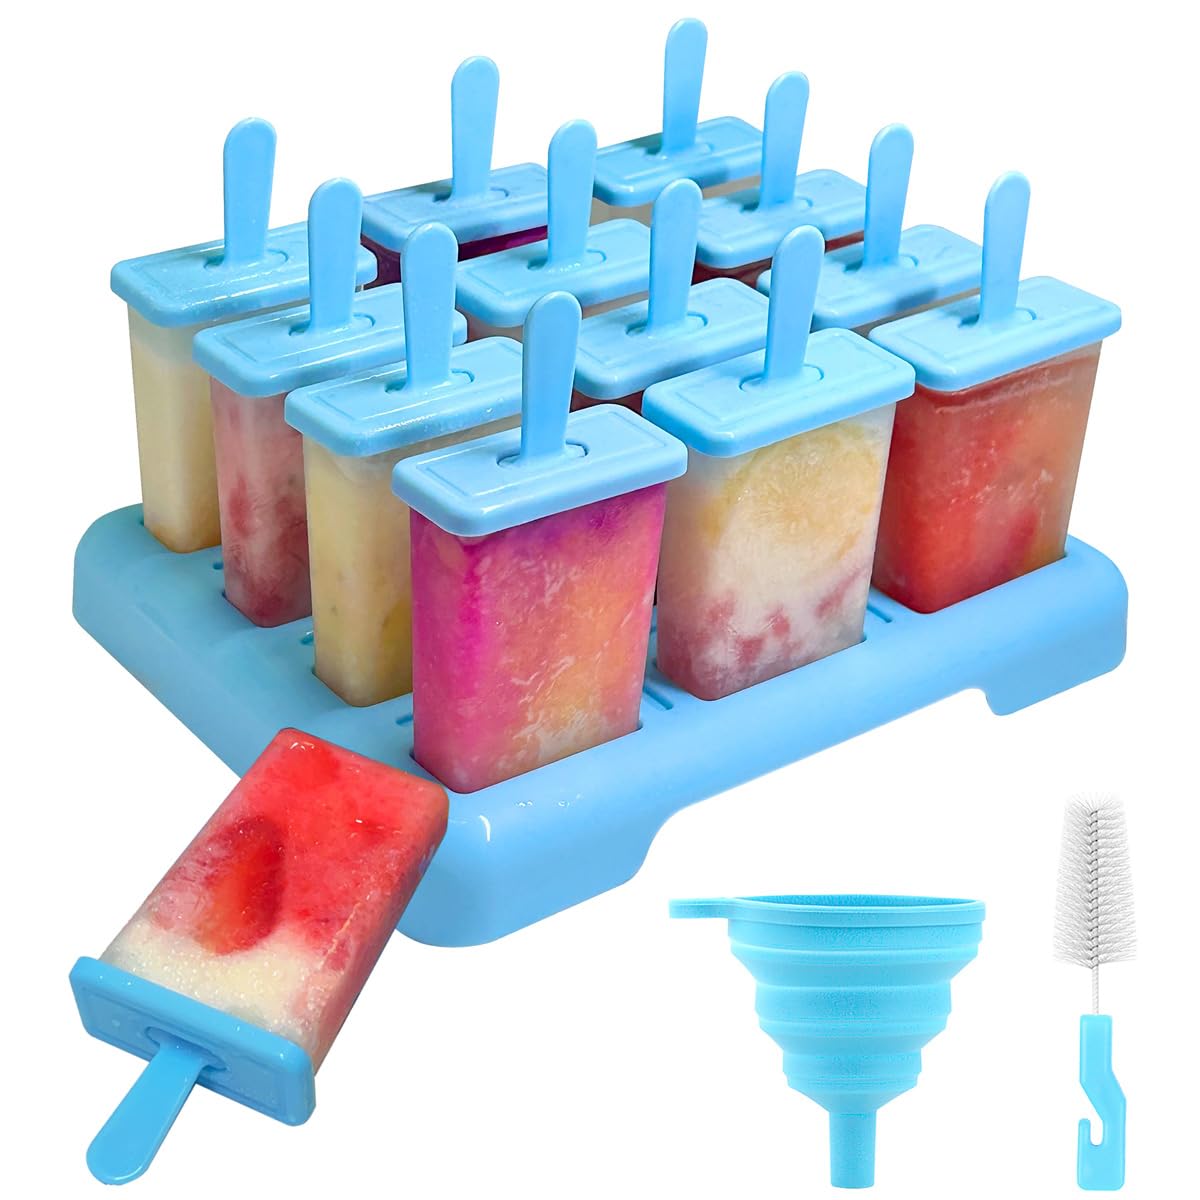 Alinana 12 Cavities Popsicles Molds, BPA-Free Popsicle Molds with Built-in Popsicle Stick, DIY Popsicle Molds with Cleaning Brus